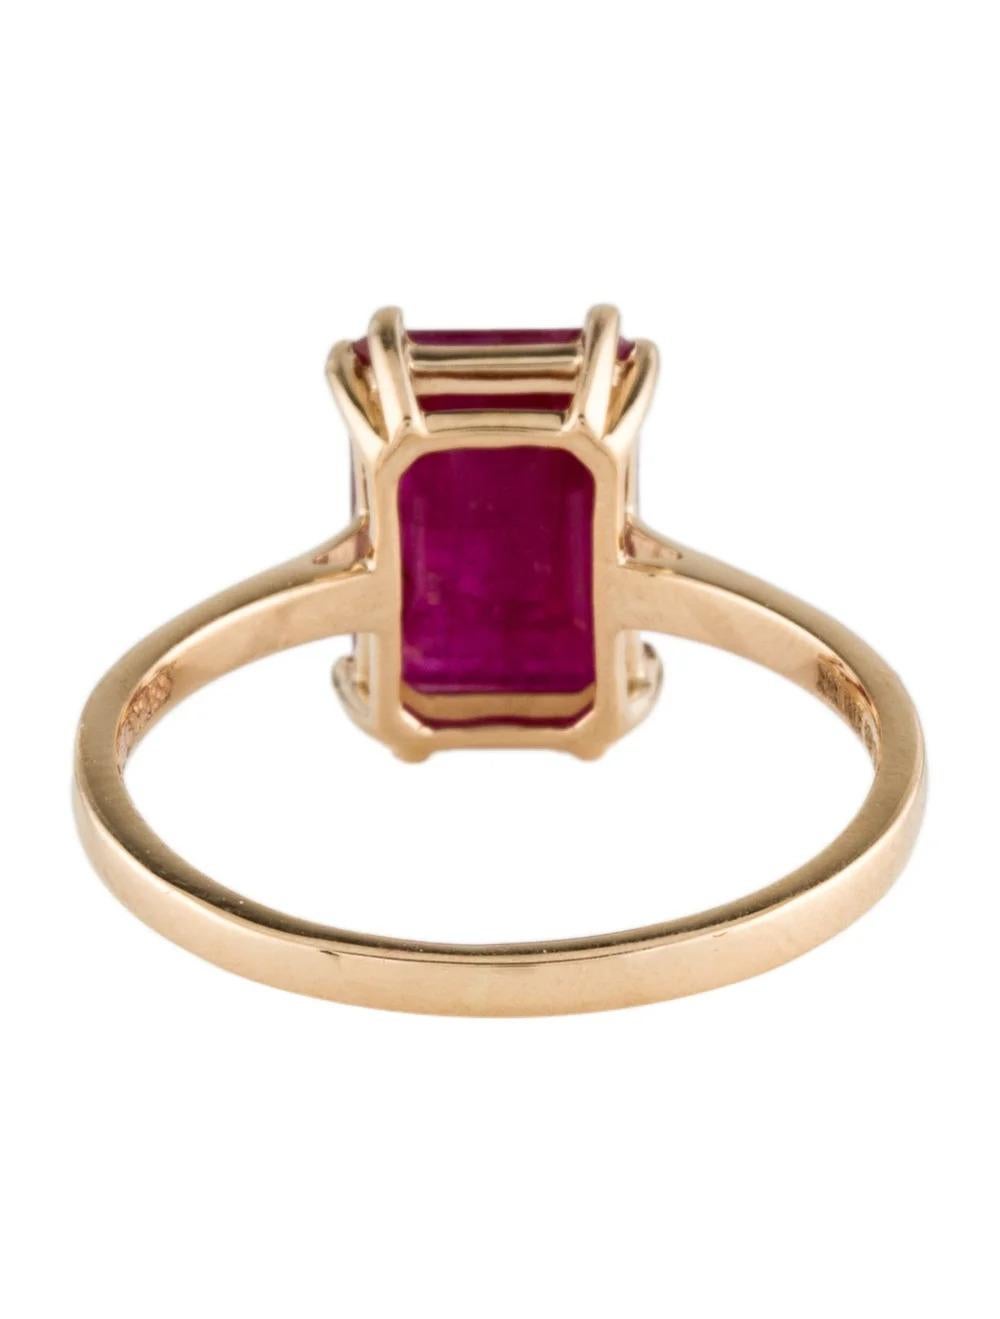 14K Ruby Cocktail Ring 1.46ct Size 6.75 - Vintage Style Fine Statement Jewelry In New Condition For Sale In Holtsville, NY